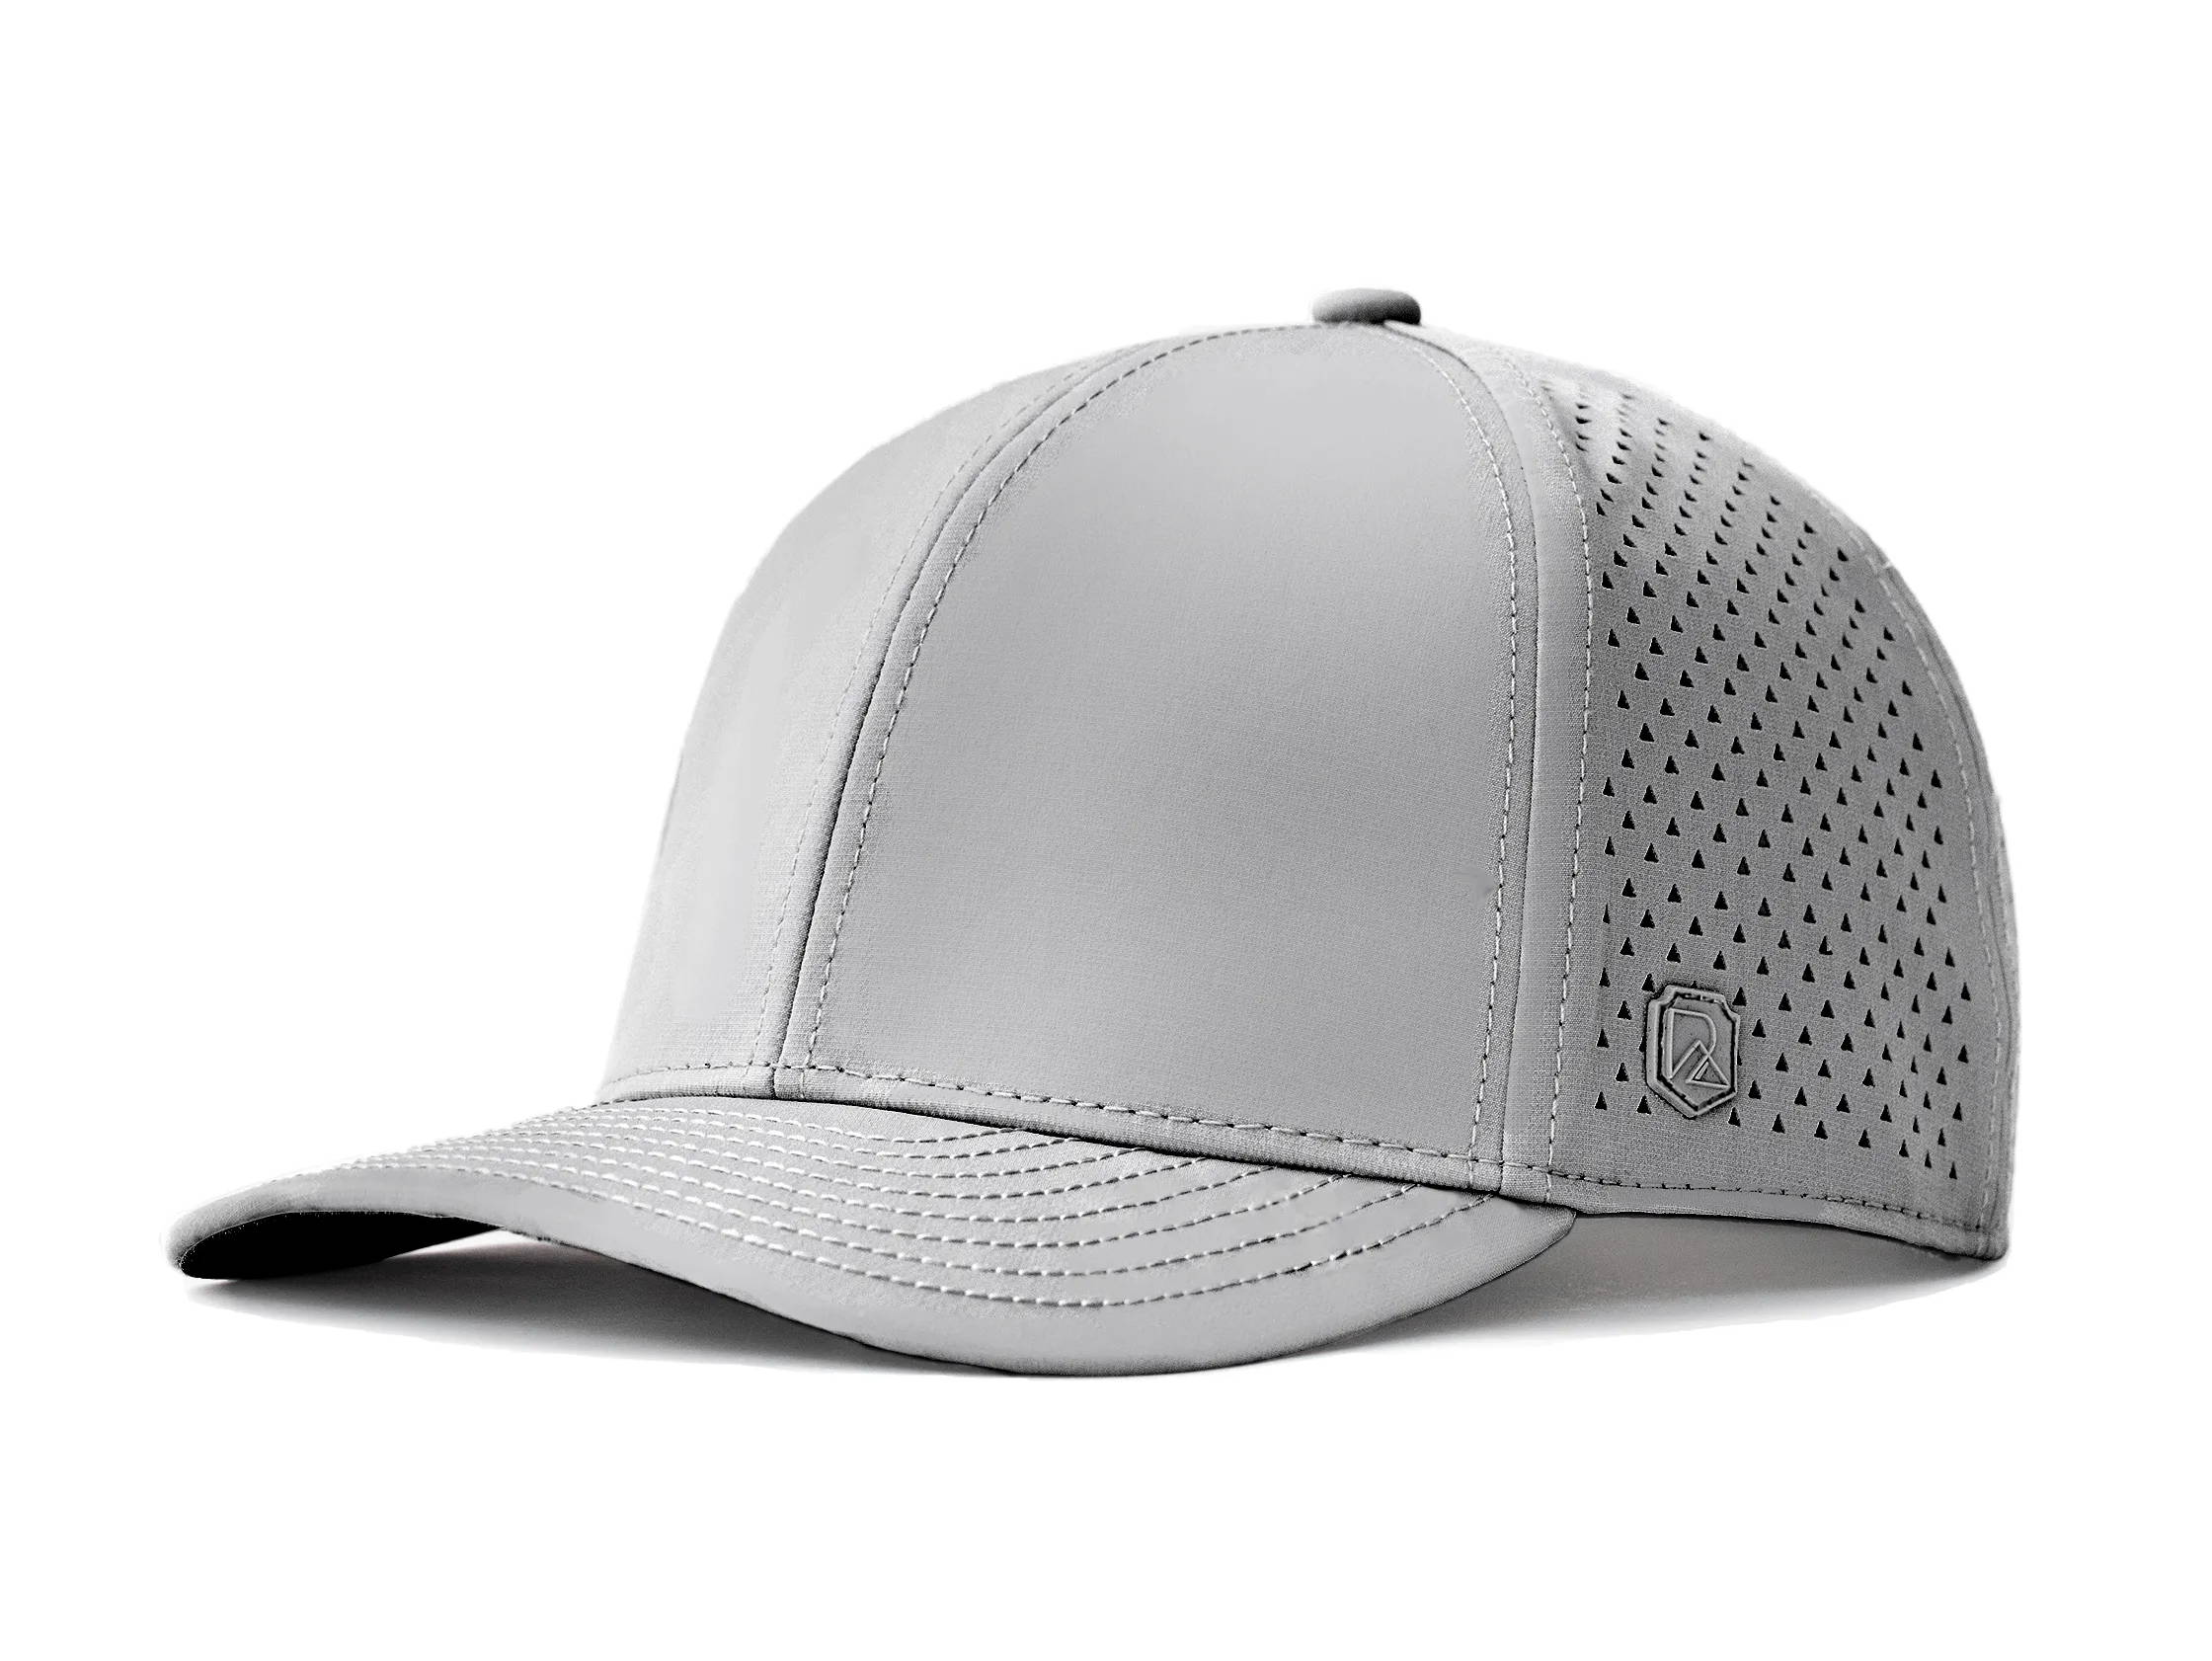 23 Best Comfortable of Golf – Most Runner\'s The – Hats Coolest 2023 Athletics and